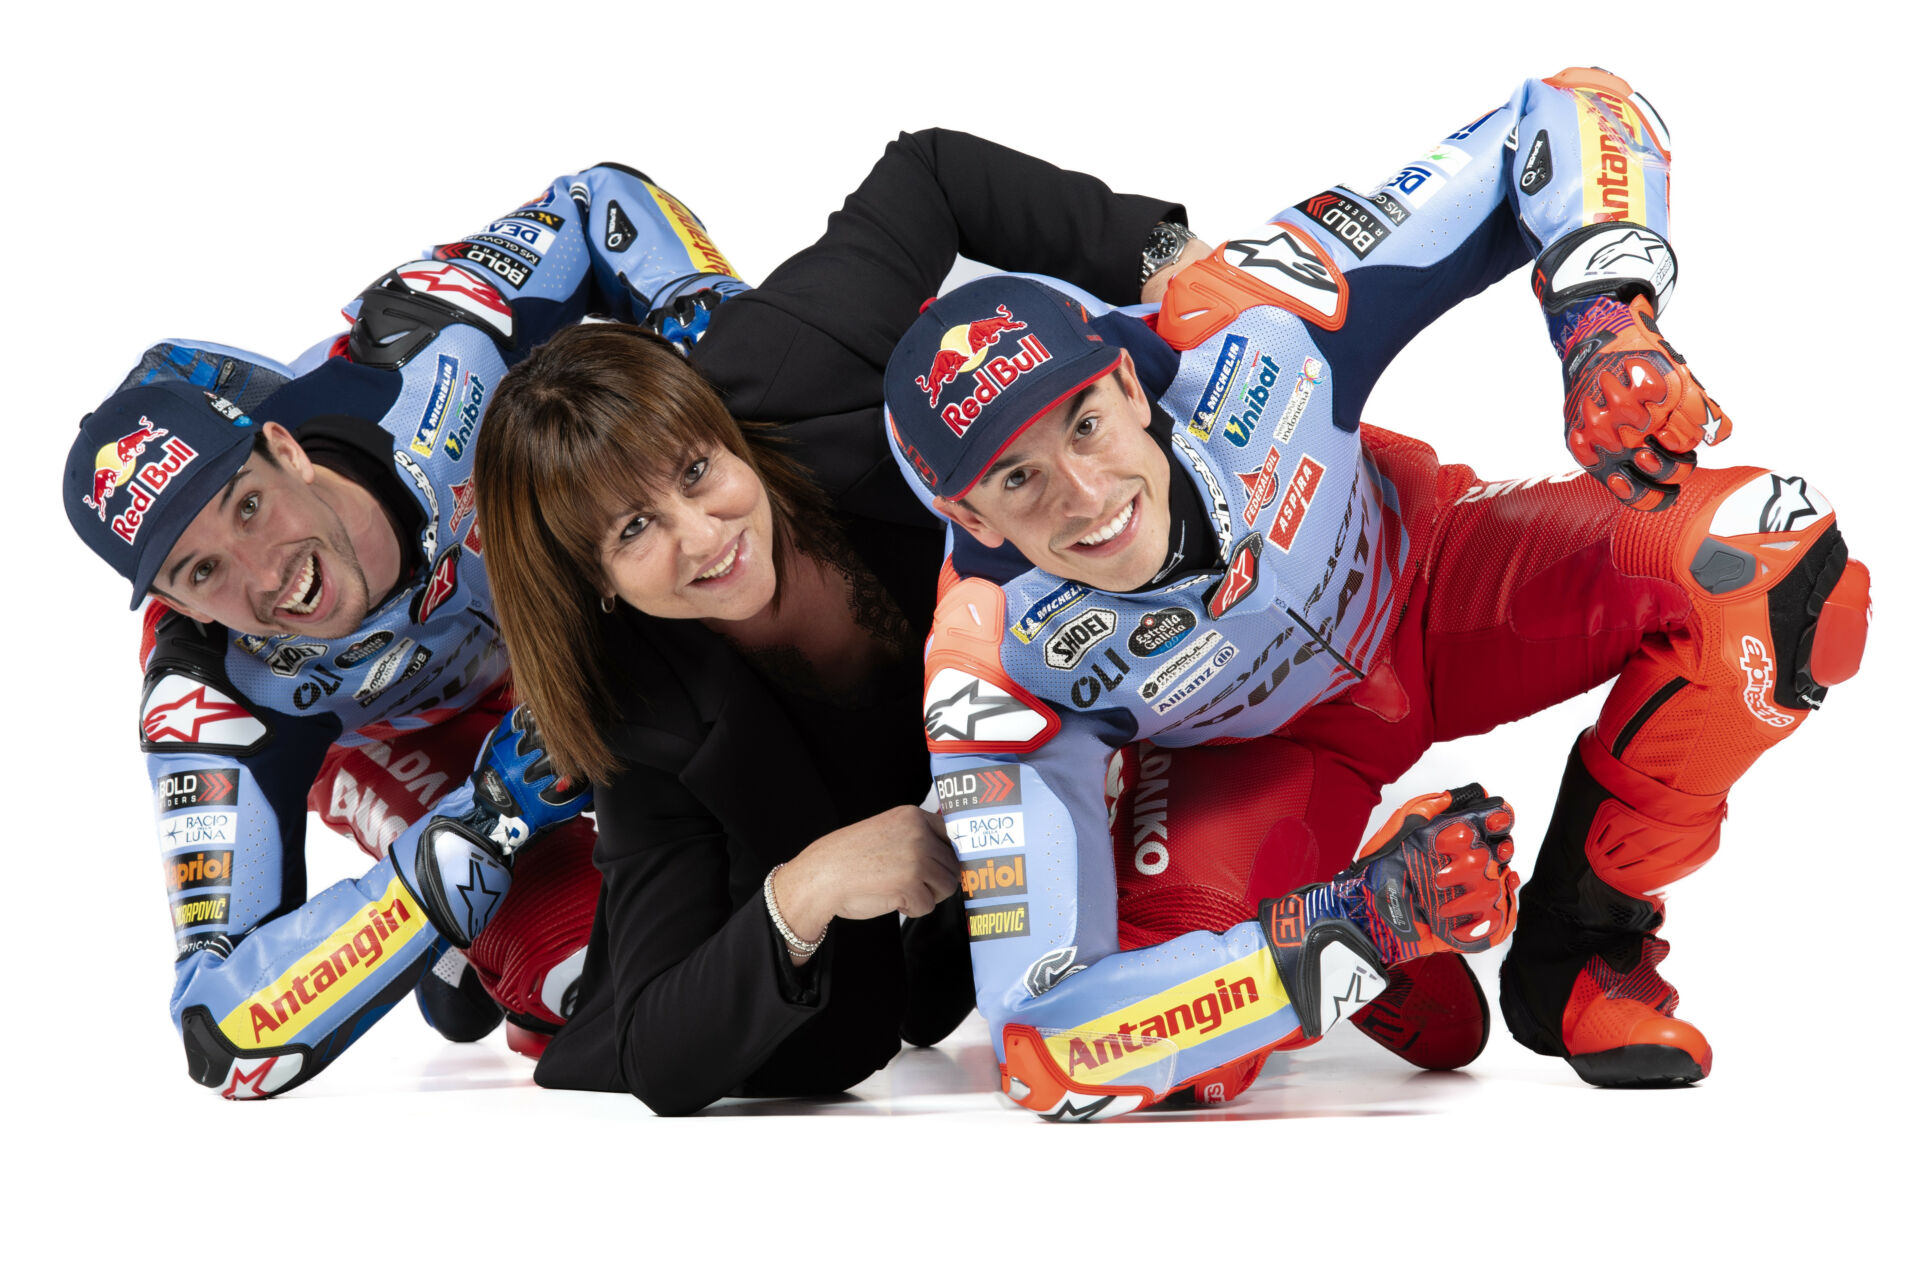 Gresini Racing Team Owner Nadia Padovani (center) with riders Alex Marquez (left) and Marc Marquez (right). Photo courtesy Gresini Racing.